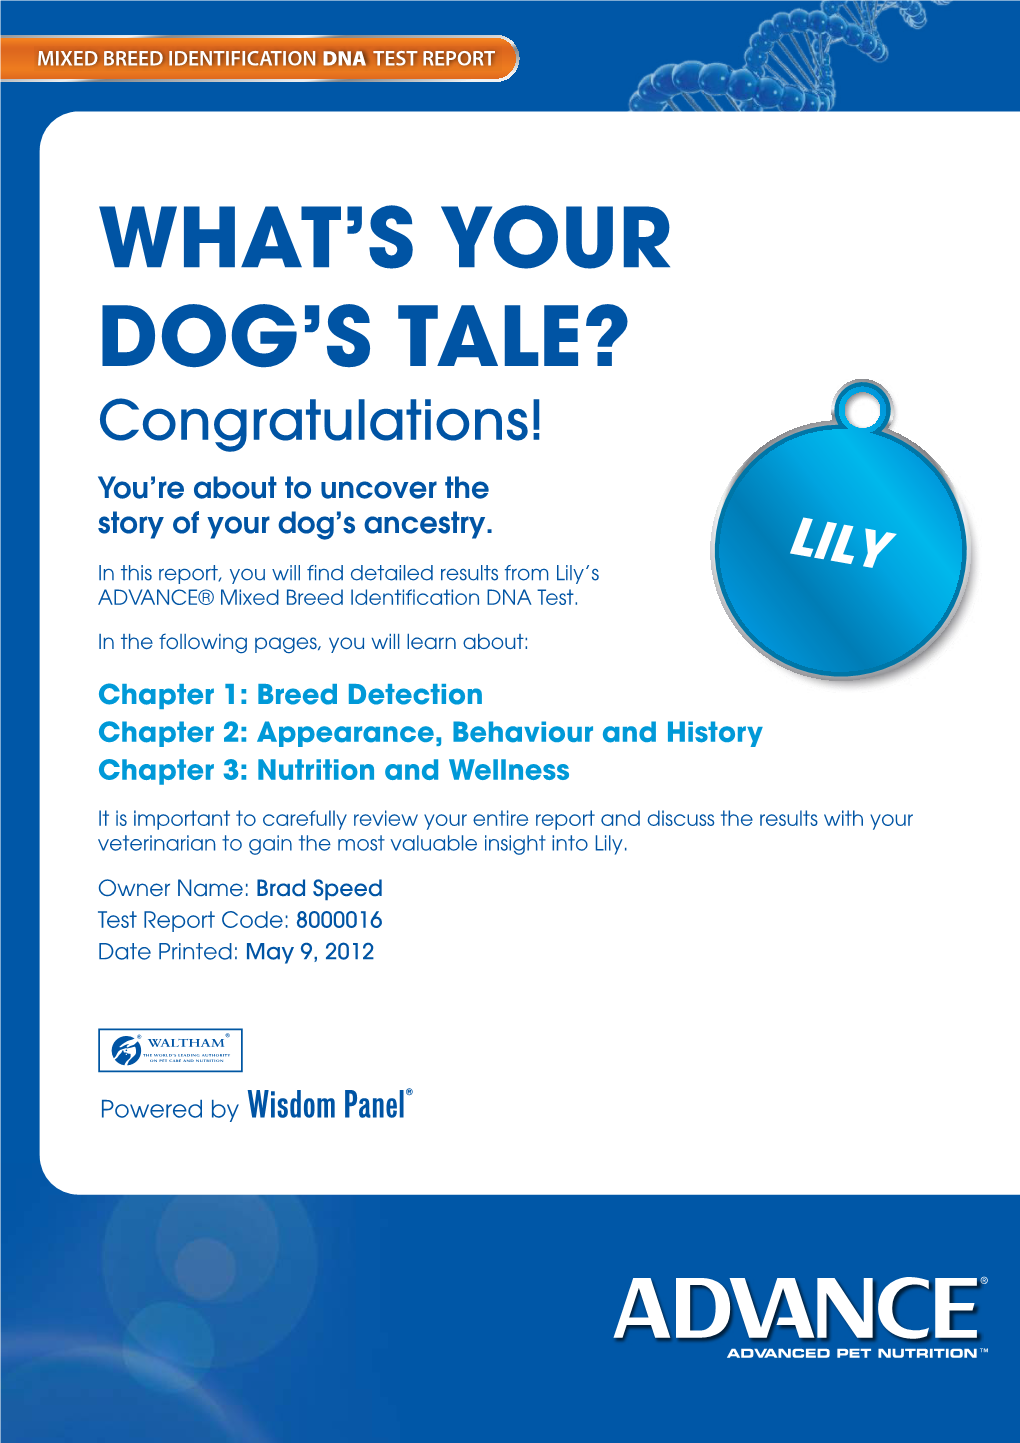 What's Your Dog's Tale?